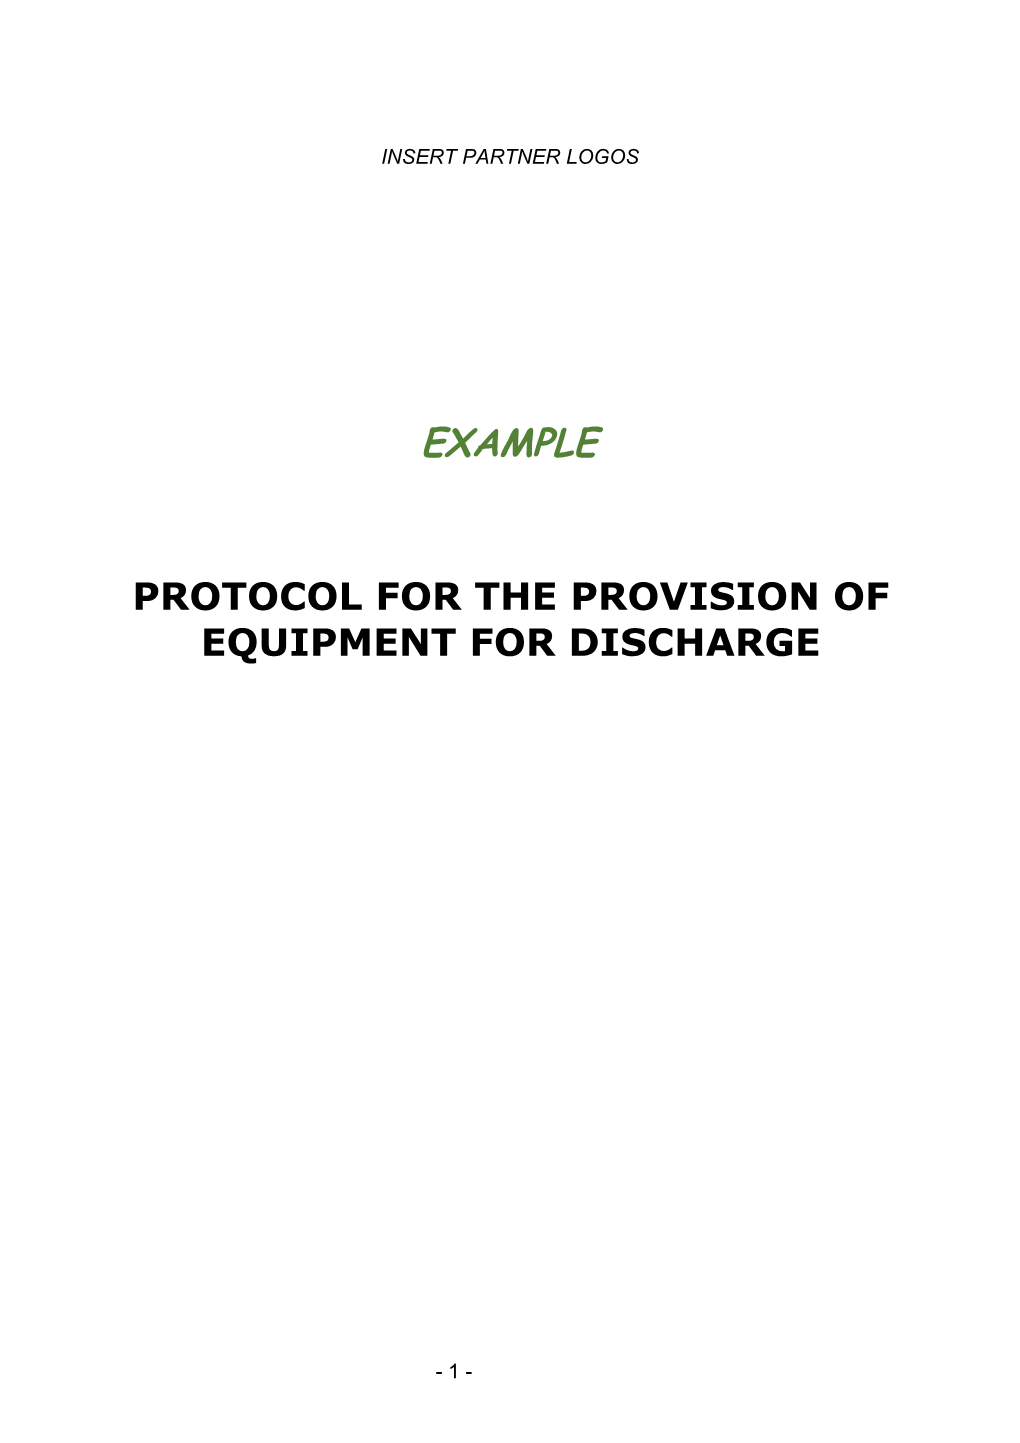 Protocol for the Provision of Equipment for Discharge